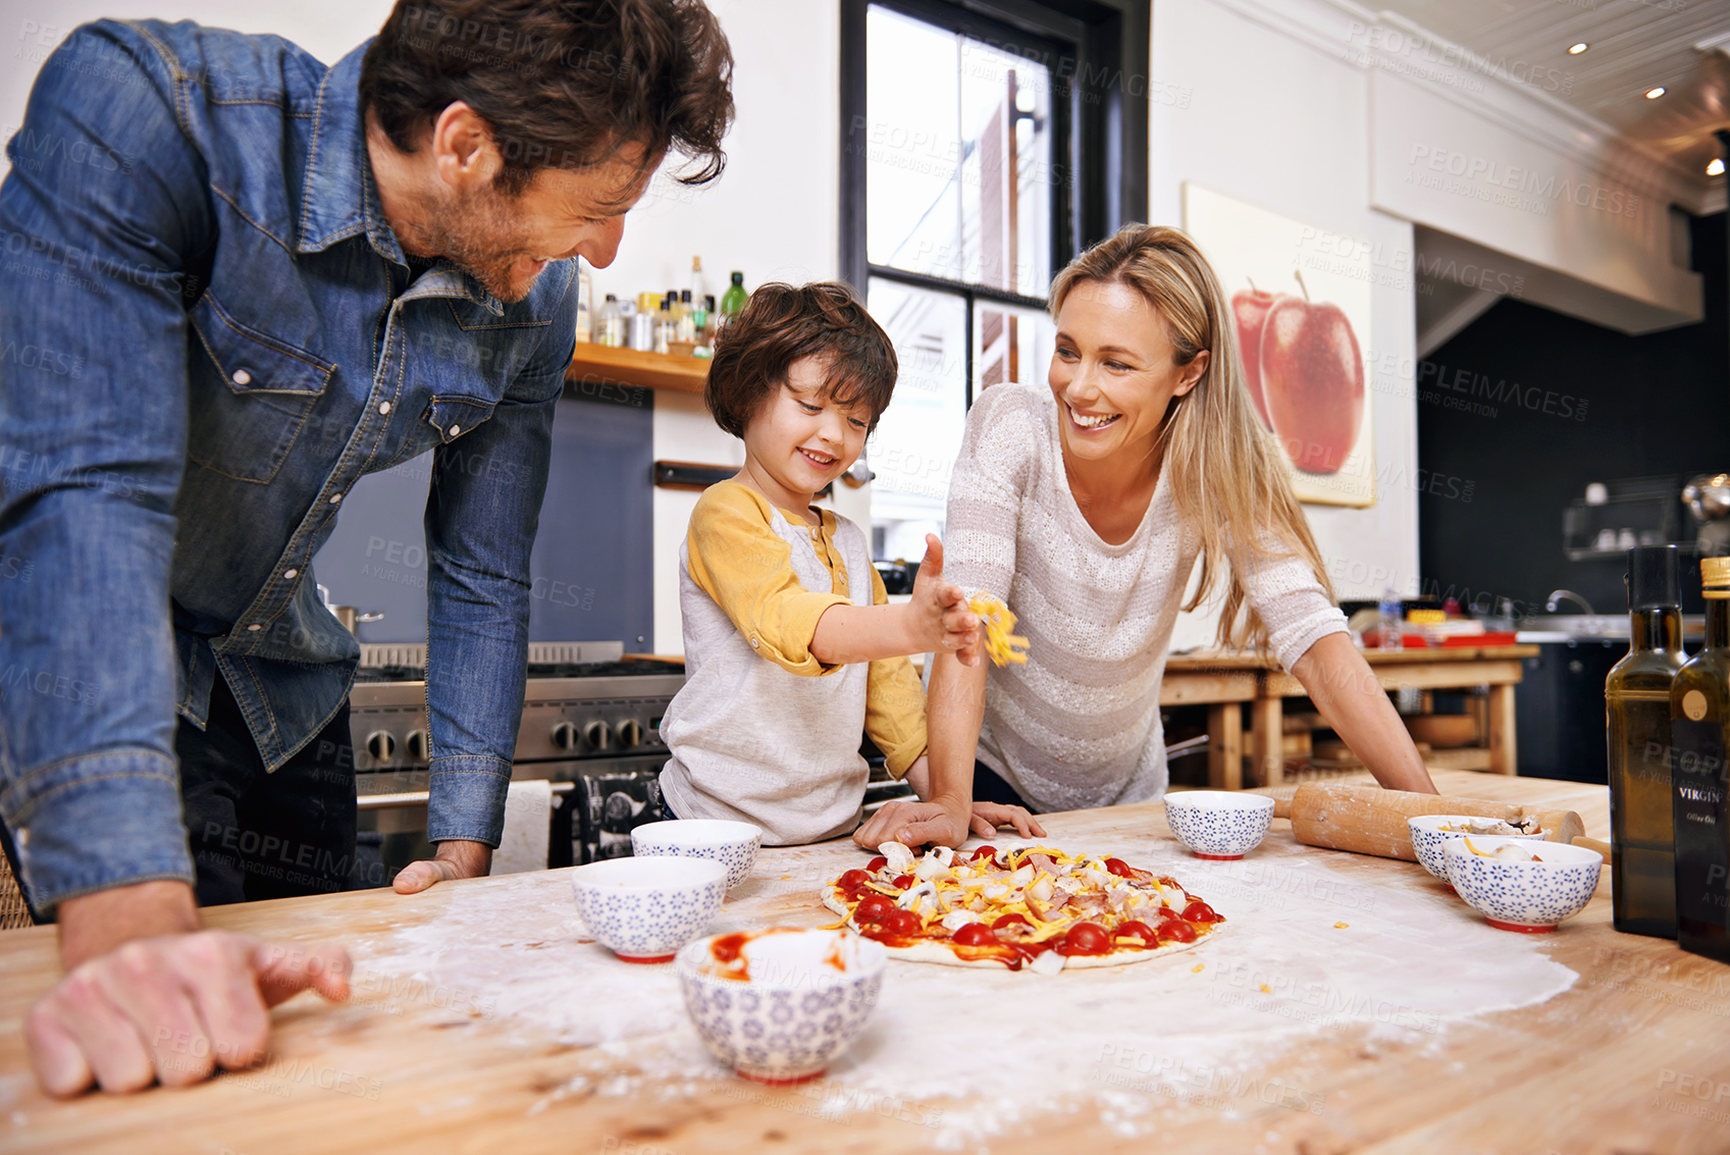 Buy stock photo A family making pizza together at home